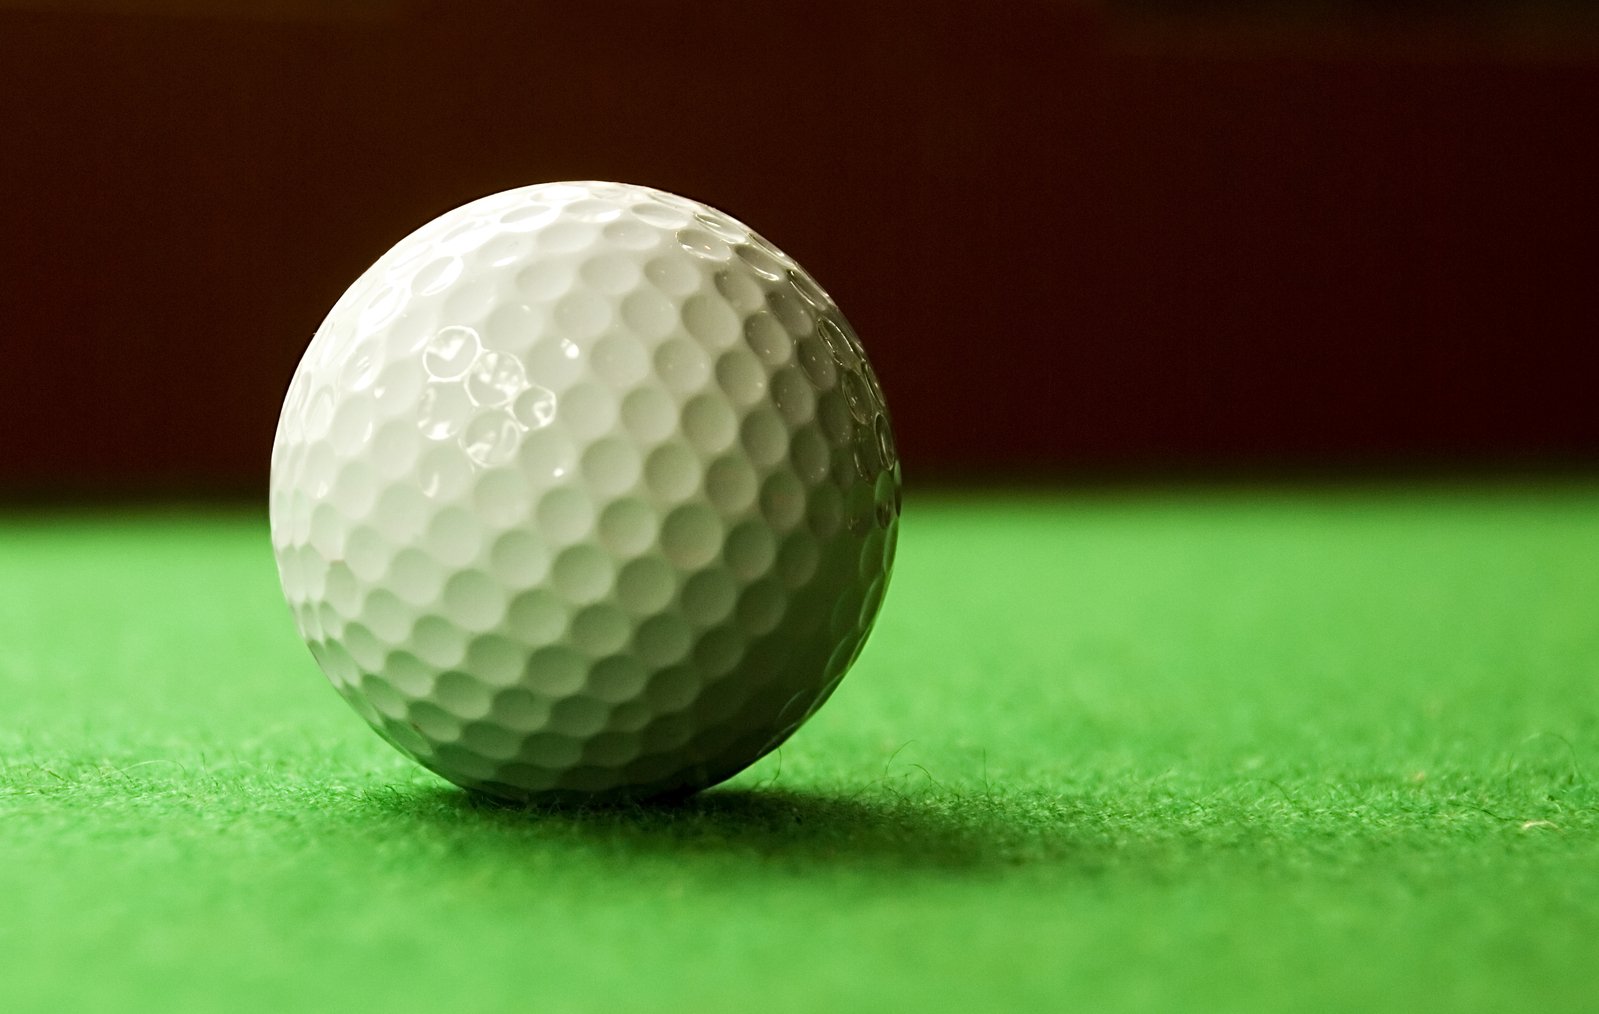 a close up of a golf ball on green surface